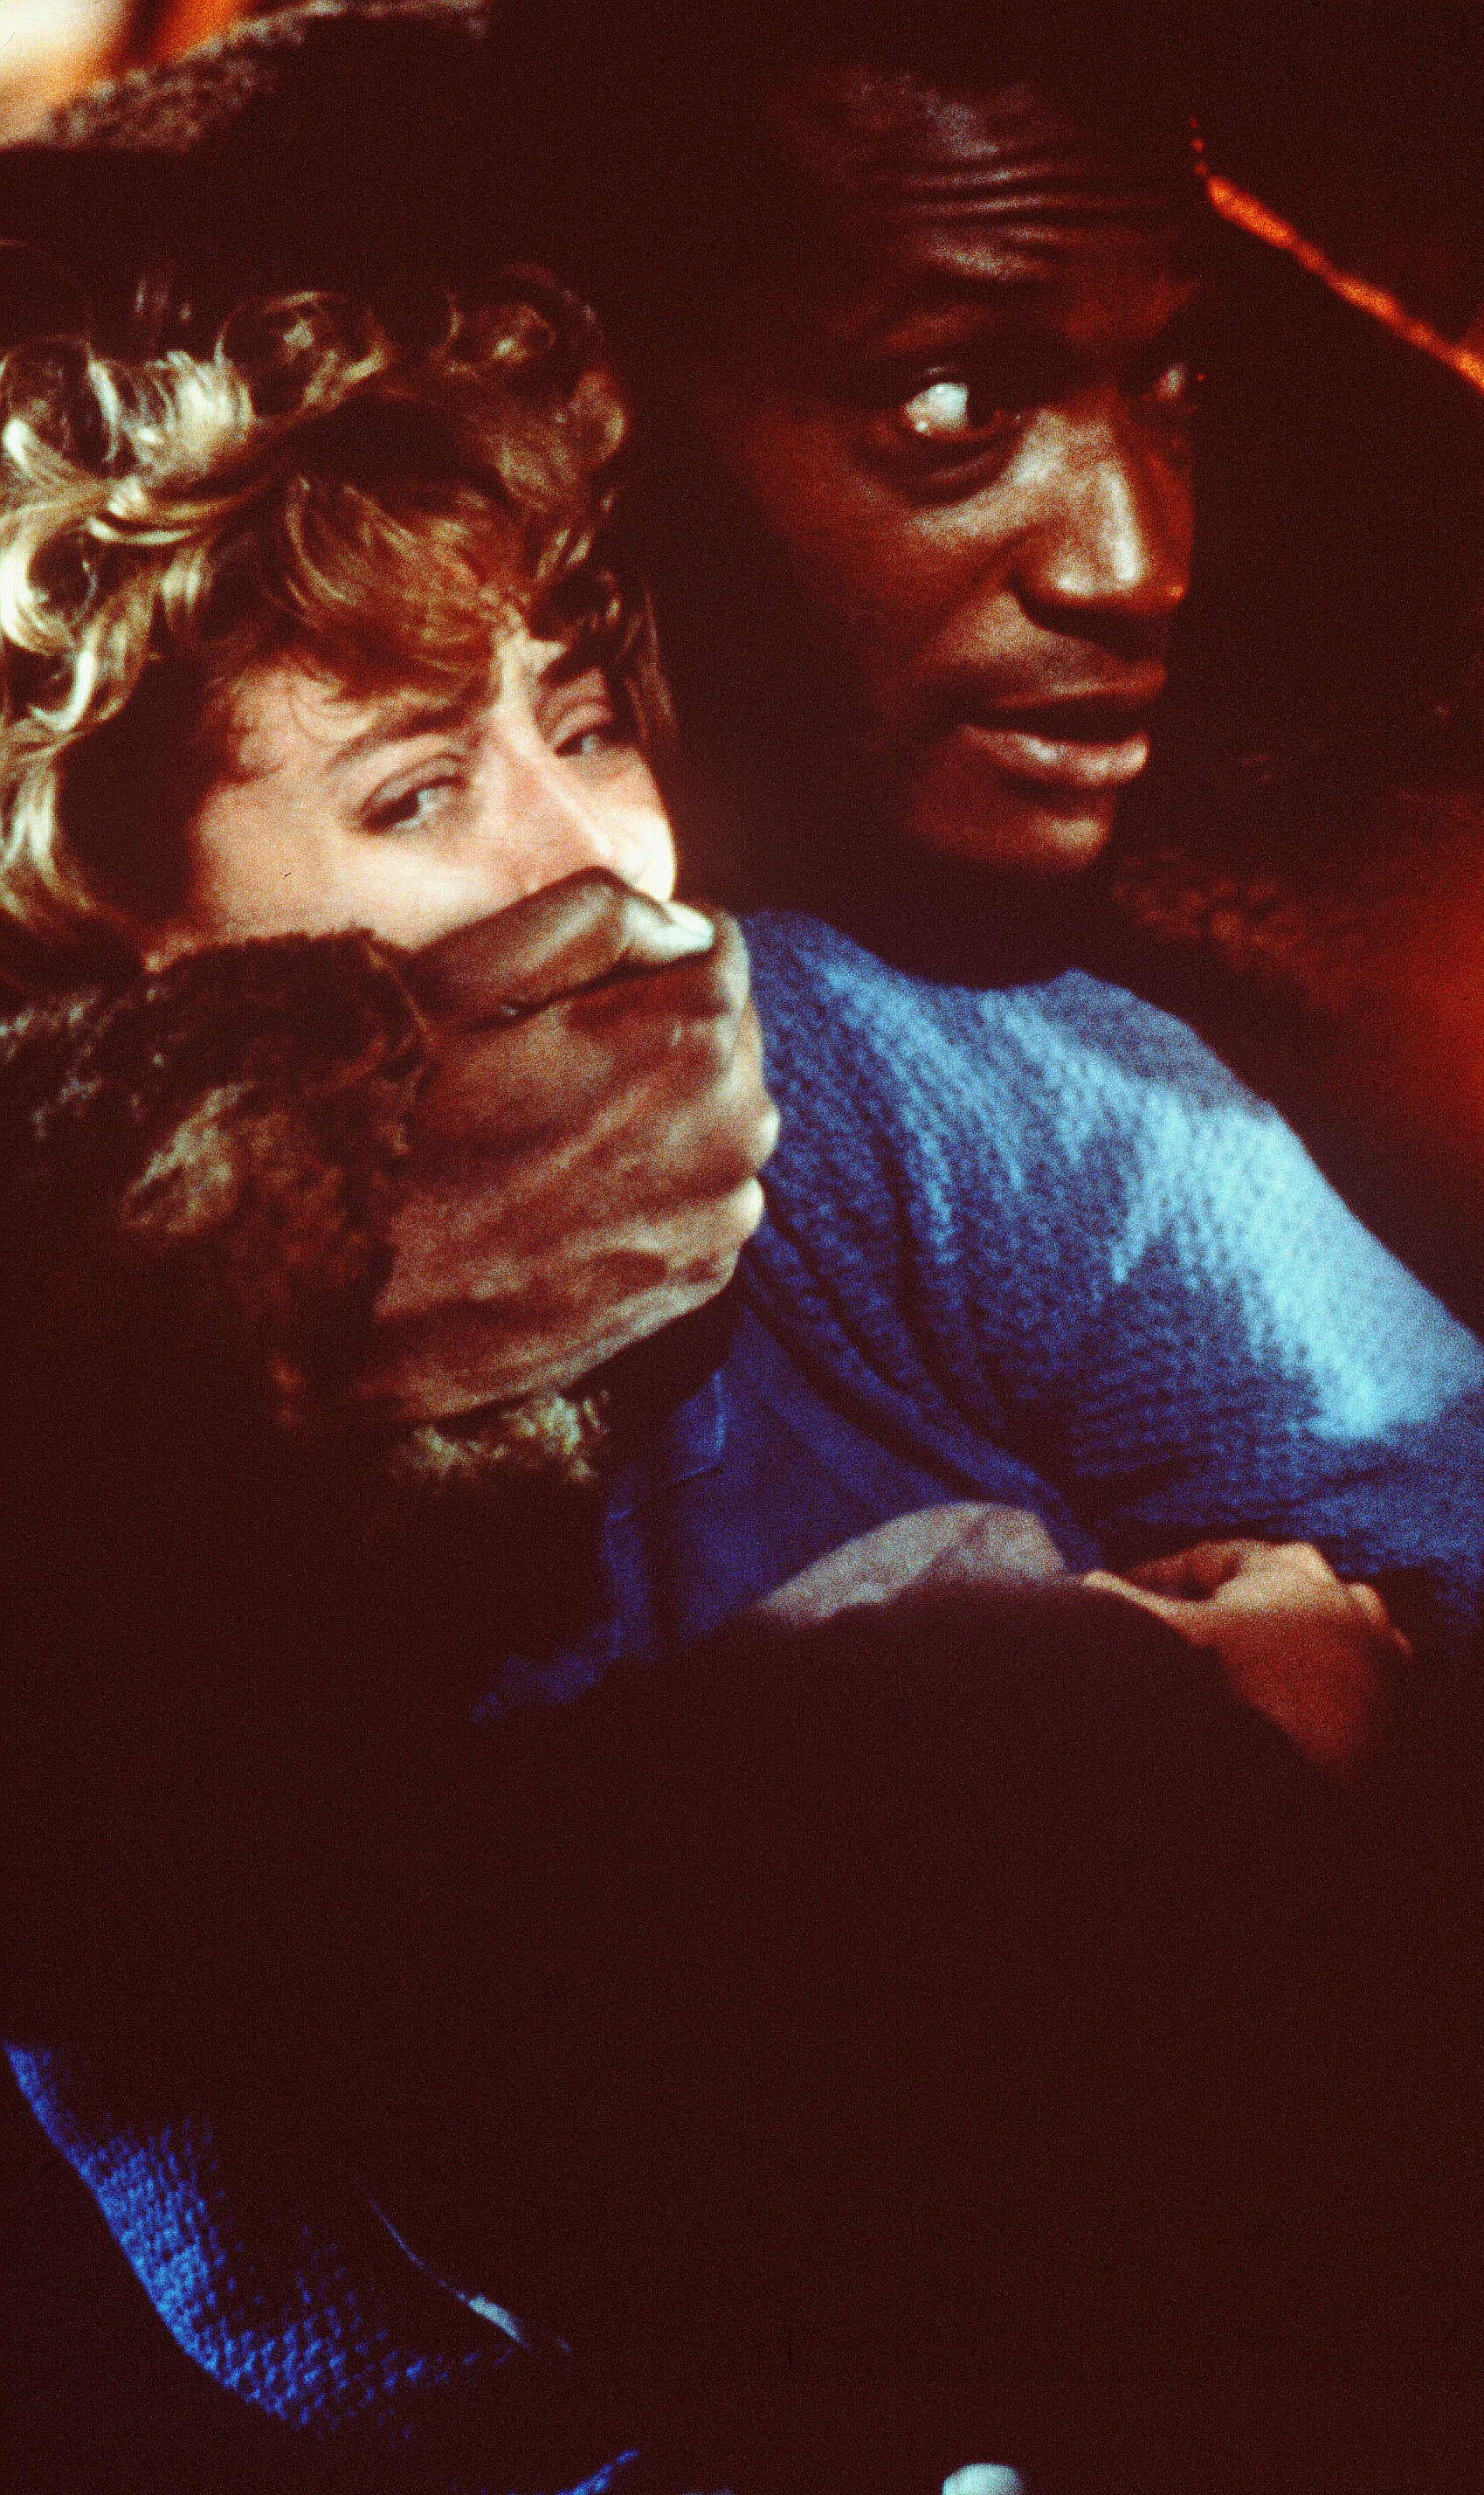 Virginia Madsen and Tony Todd in ‘Candyman'